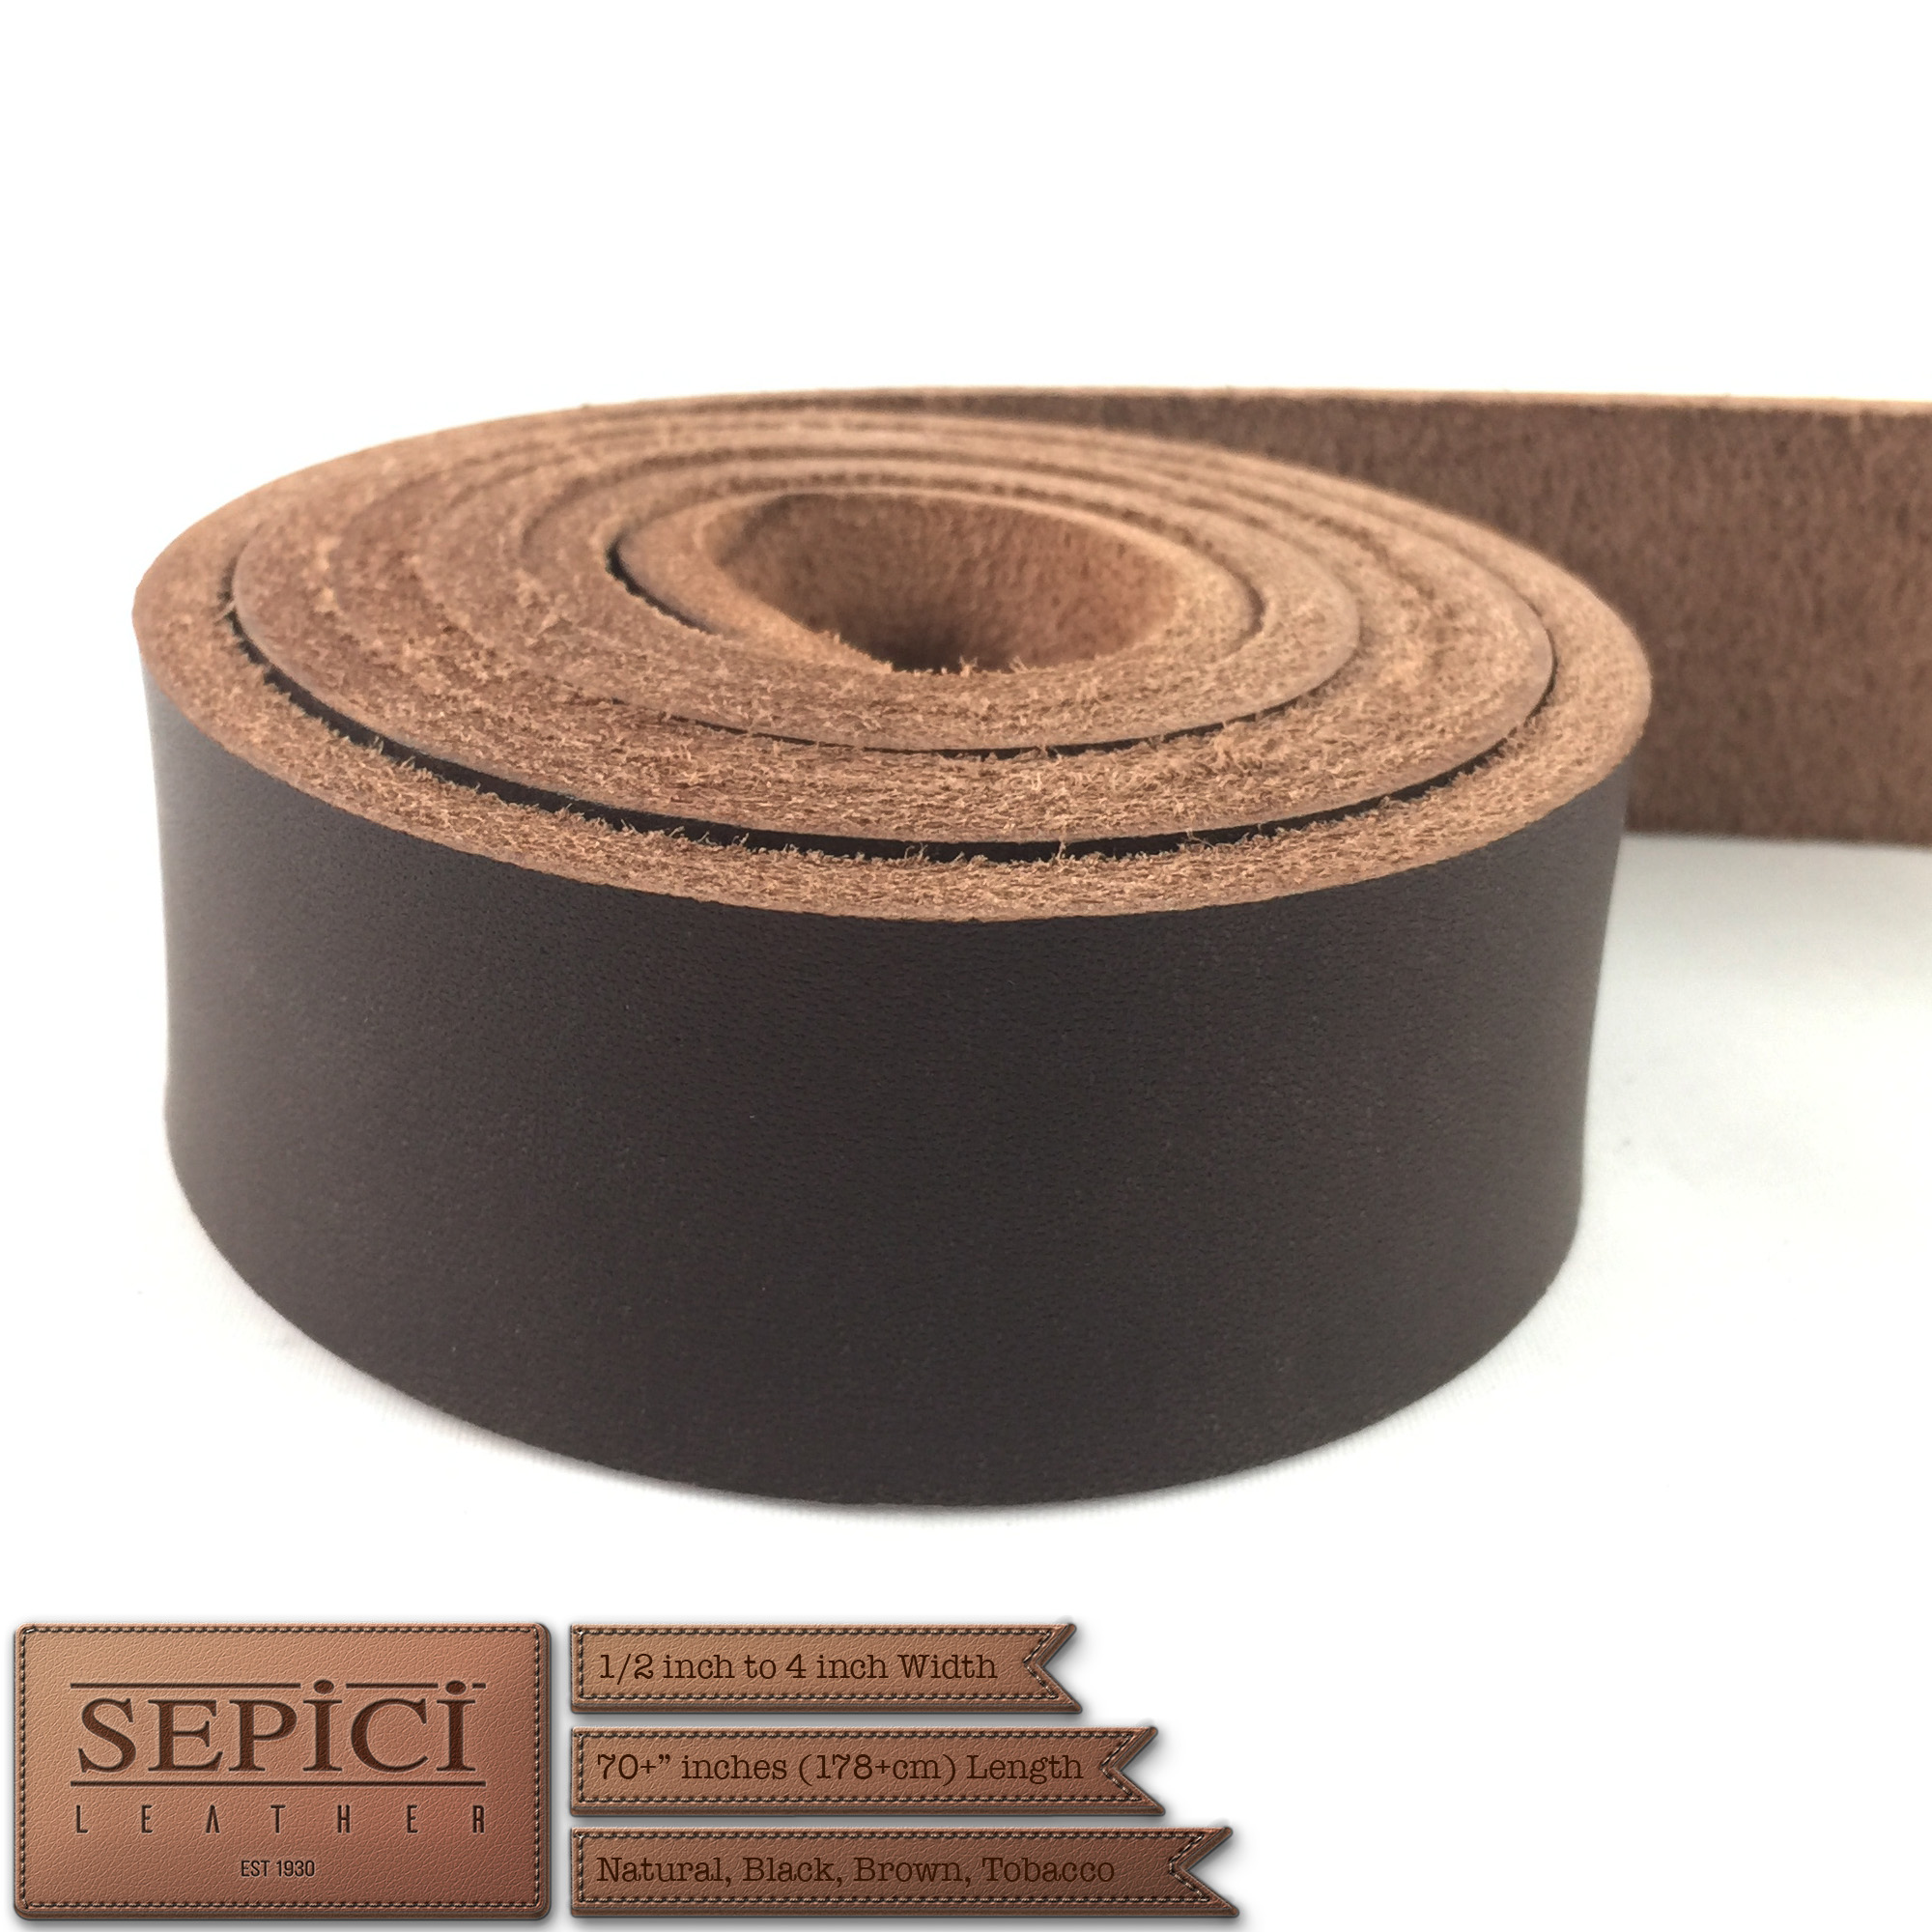 4 Inch Wide Genuine Leather Strap-long Leather Strip,italian Leather,straps  Diy,purse Straps,brown Strip,natural Leather Belt,leather Craft 